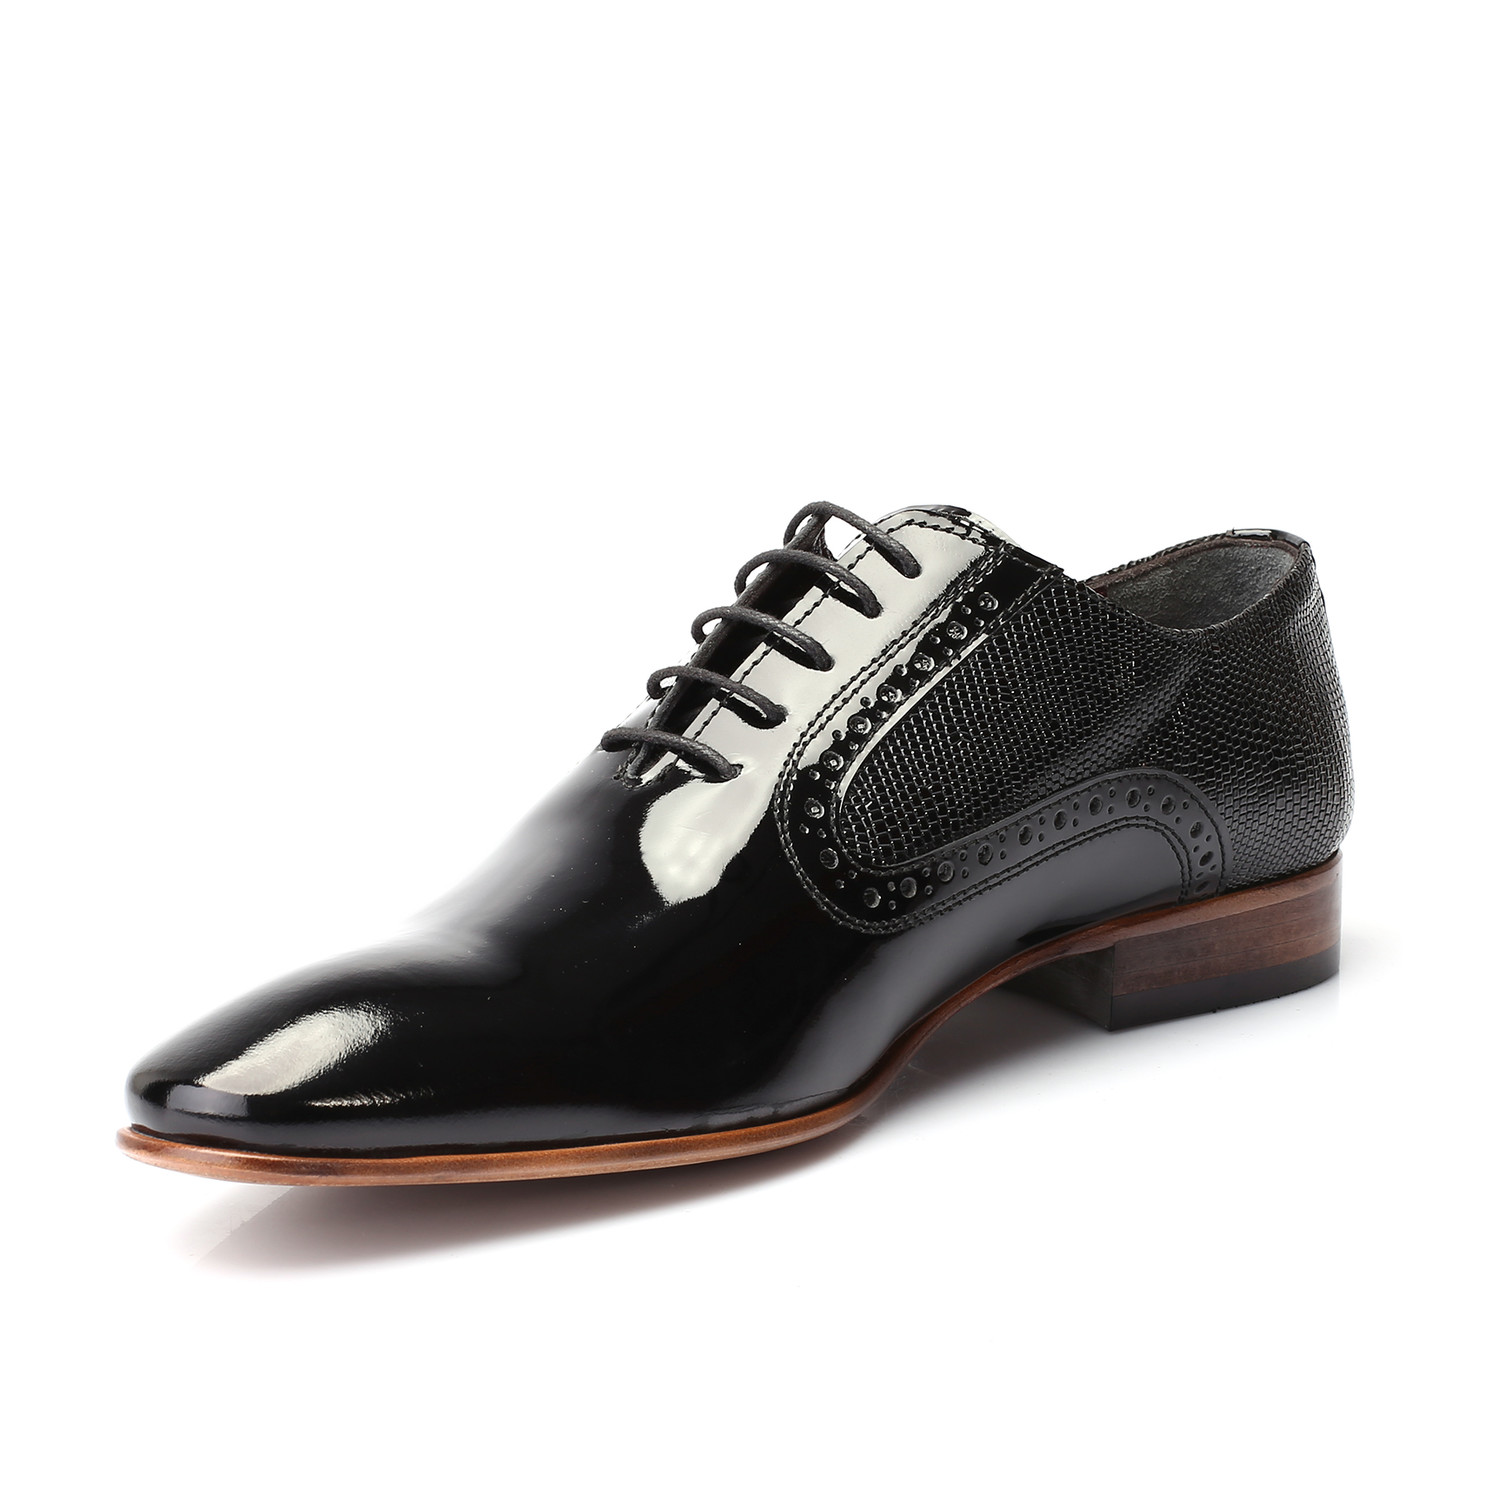 Scale Embossed Patent Brogue Oxford // Black (Euro: 40) - Deckard Shoes ...